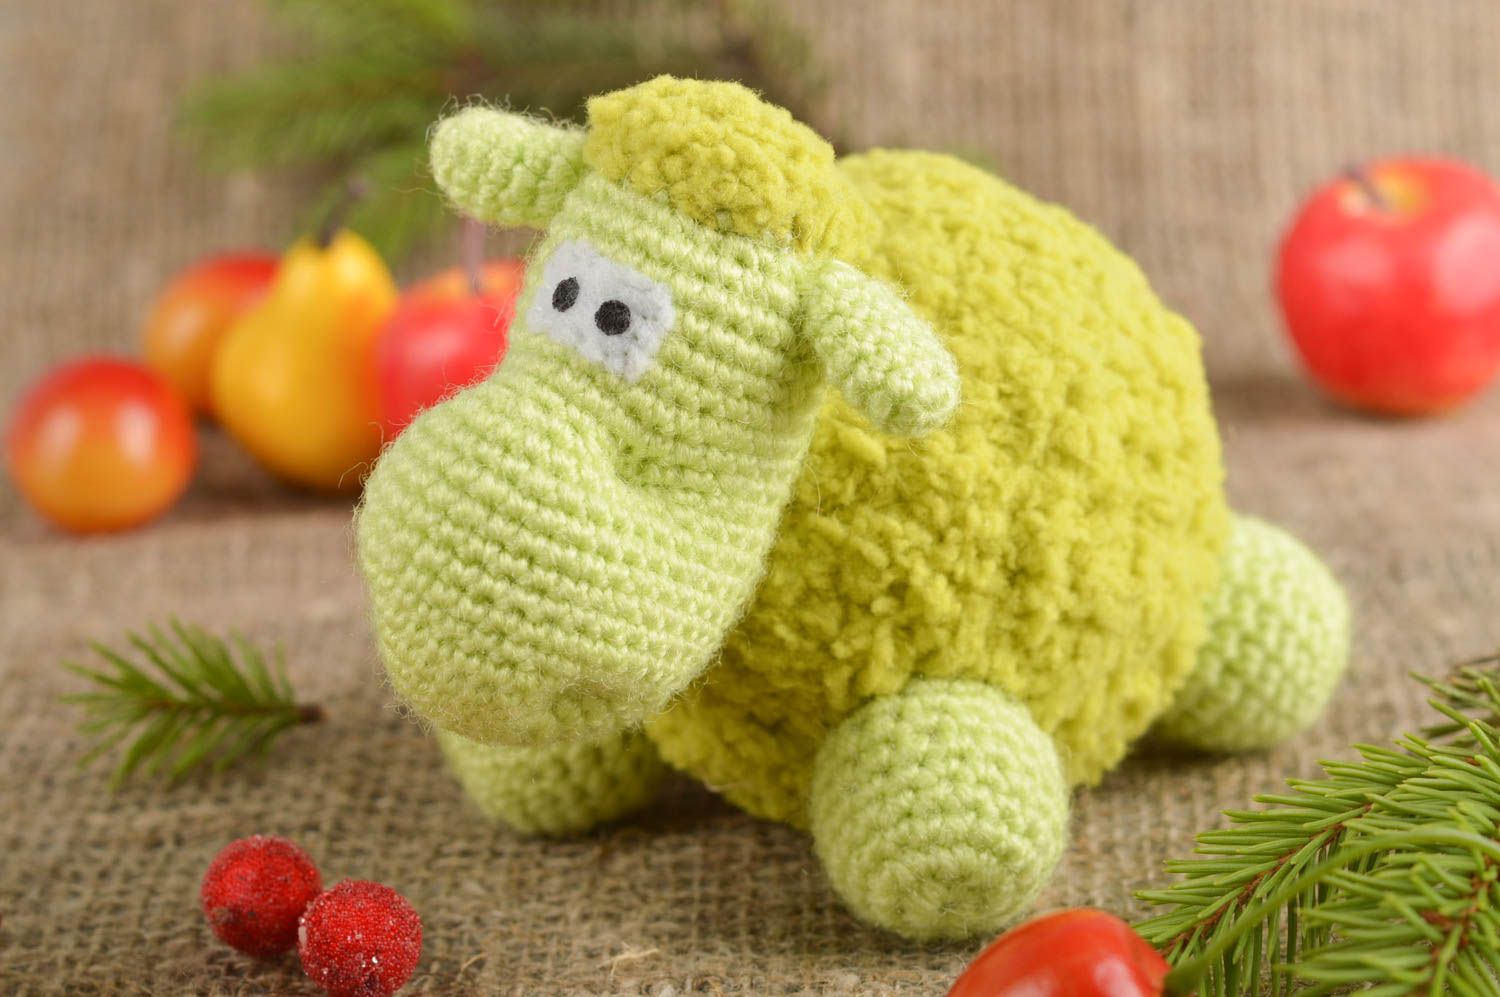 Handmade soft toy lamb toy crochet toy gifts for kids nursery decorating ideas photo 1